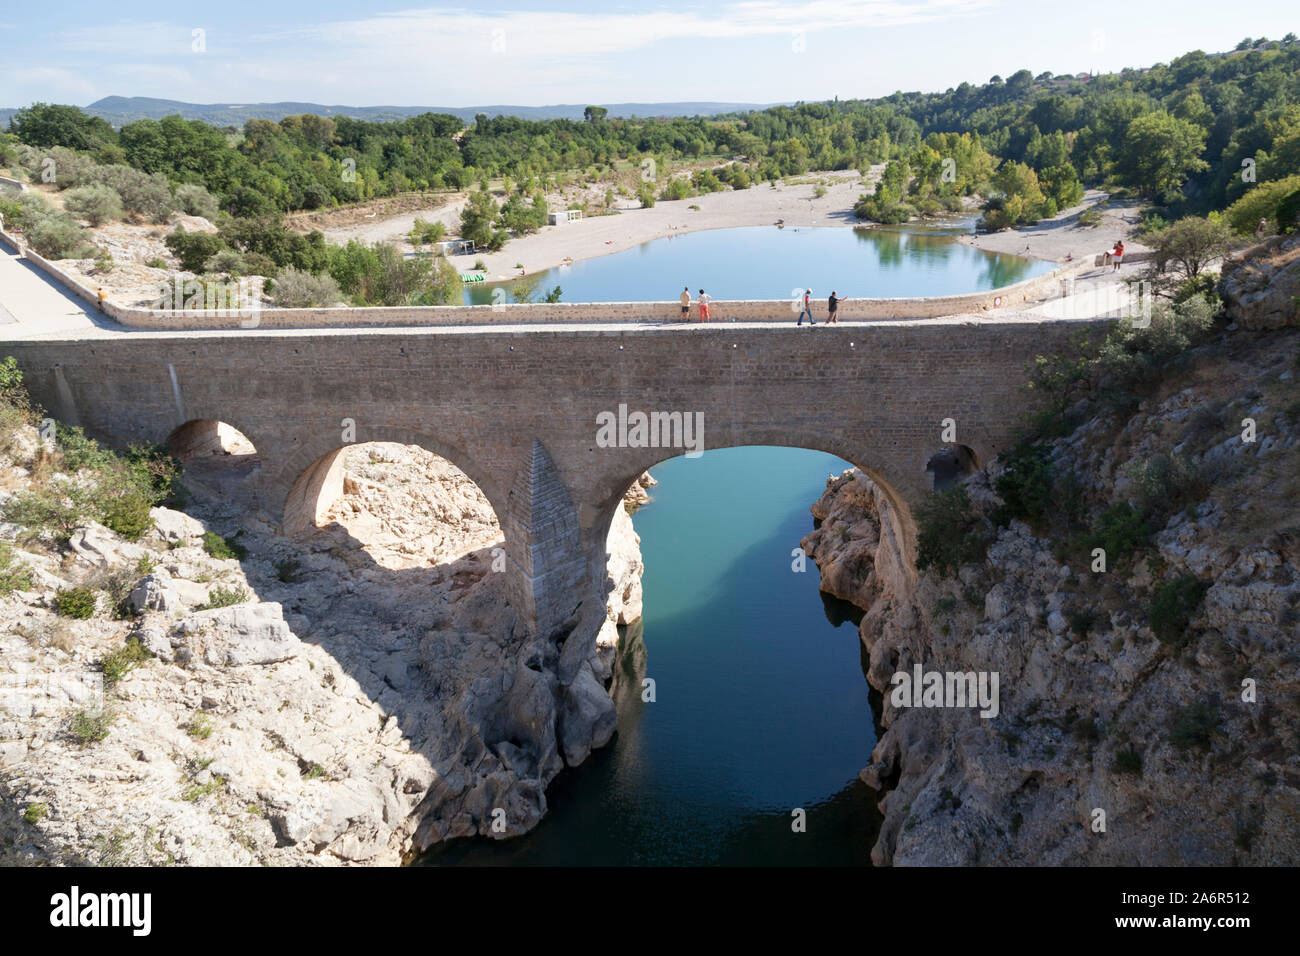 France, Languedoc, pont du Diable, the 11th century bridge at  the base of the gorge near the hill top village of St Guilhem le Desert. Stock Photo